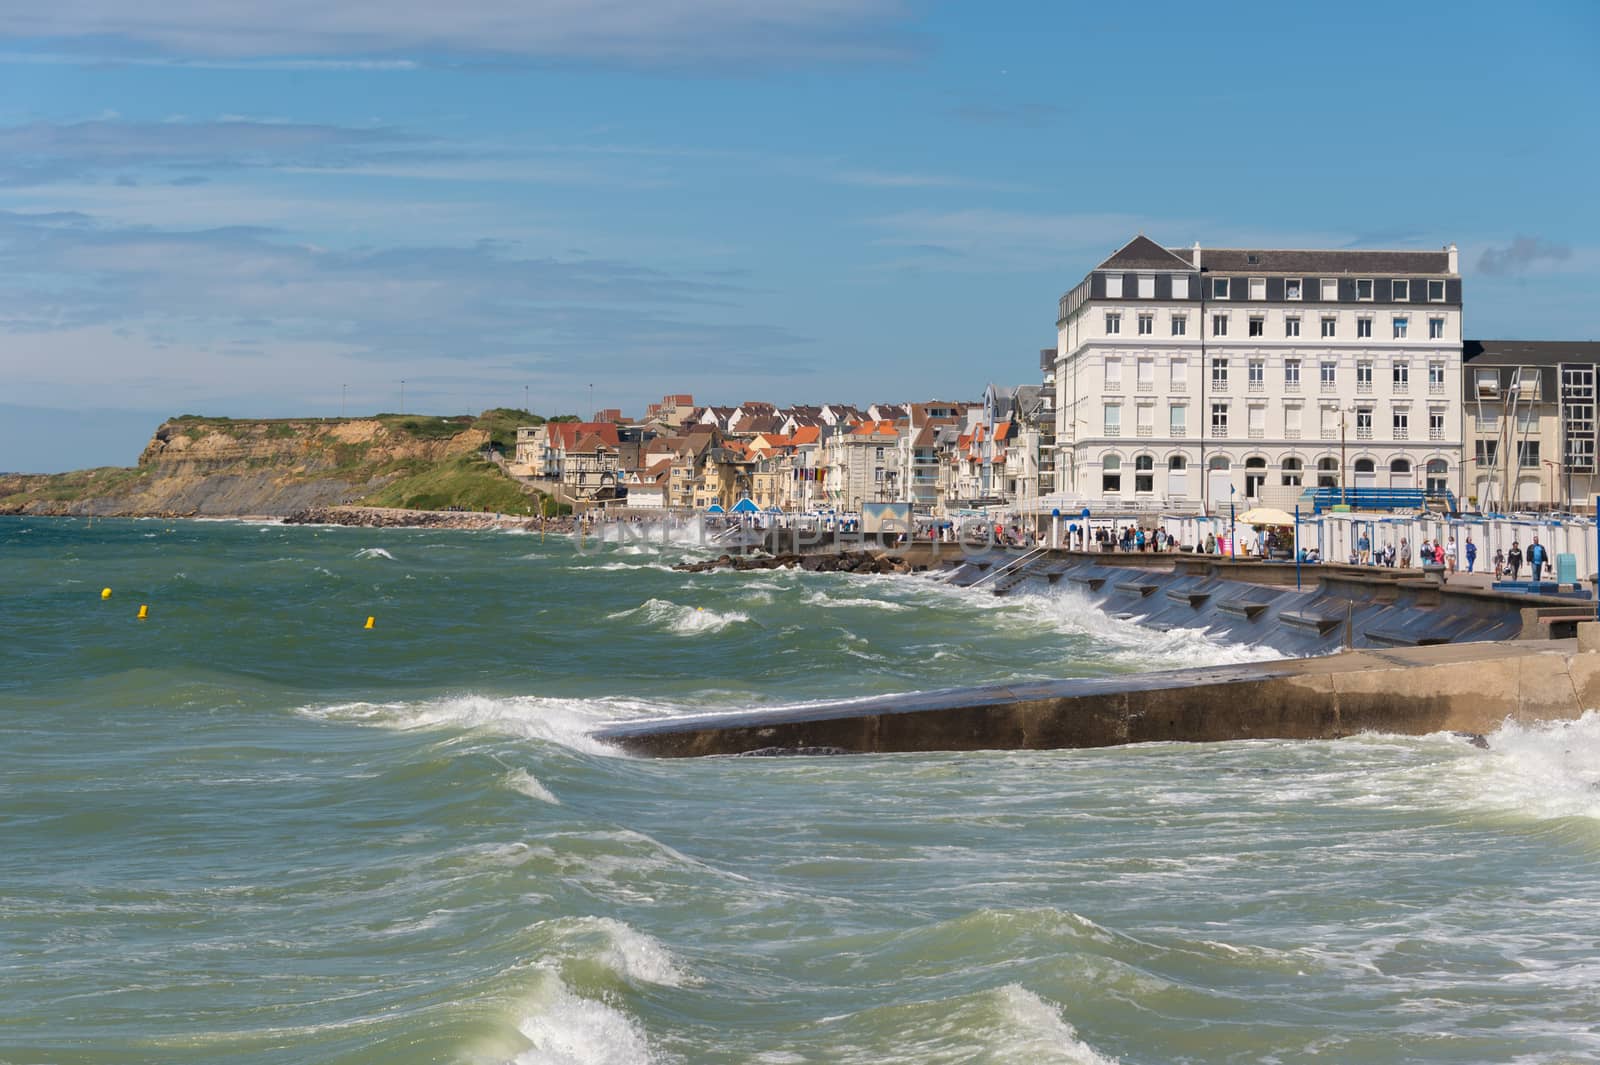 Wimereux, France - 16 June 2018: View of the sea front promenade as waves are hitting the seawall.